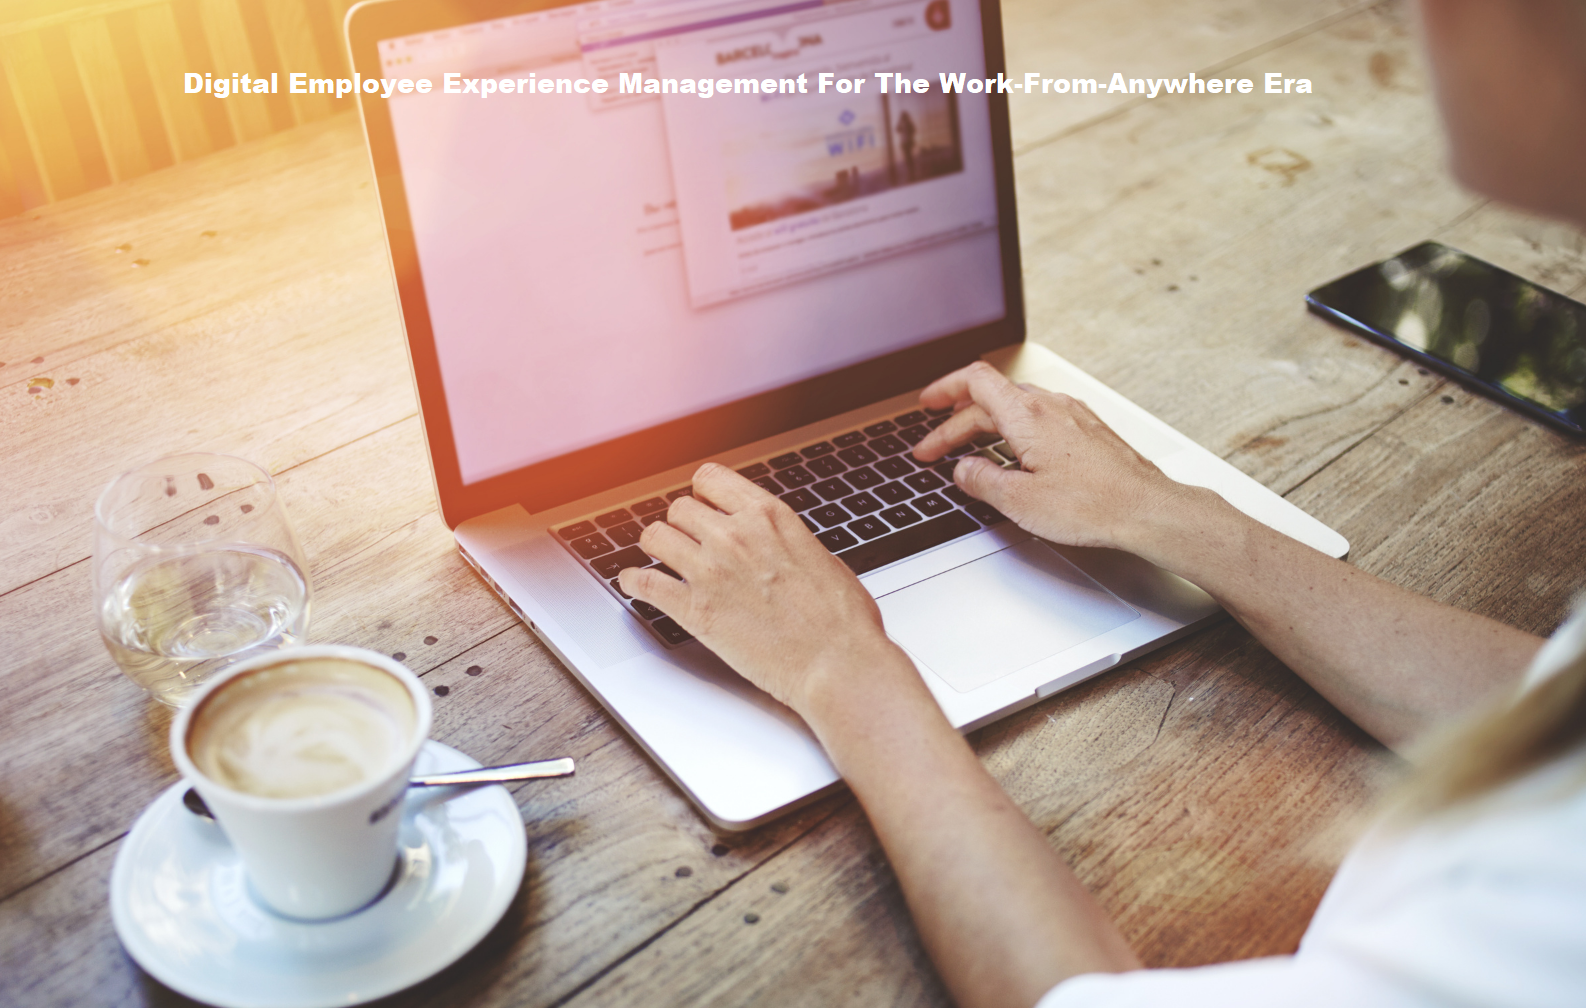 Digital Employee Experience Management For The Work-From-Anywhere Era